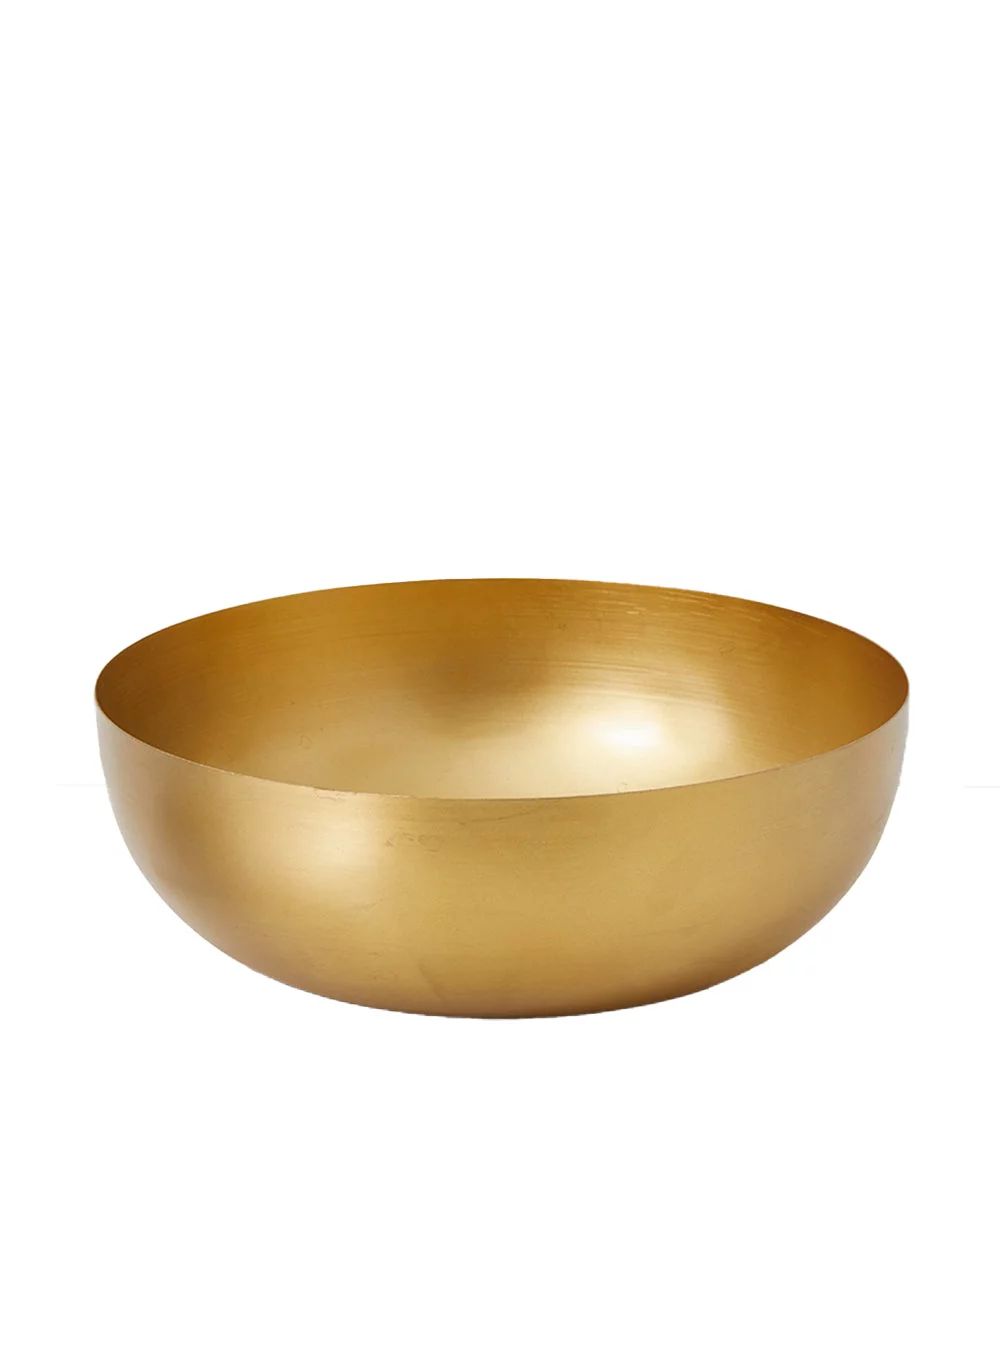 Serene Spaces Living Vintage Gold Decorative Iron Bowl, for Living Room, Kitchen and Home Decor -... | Walmart (US)